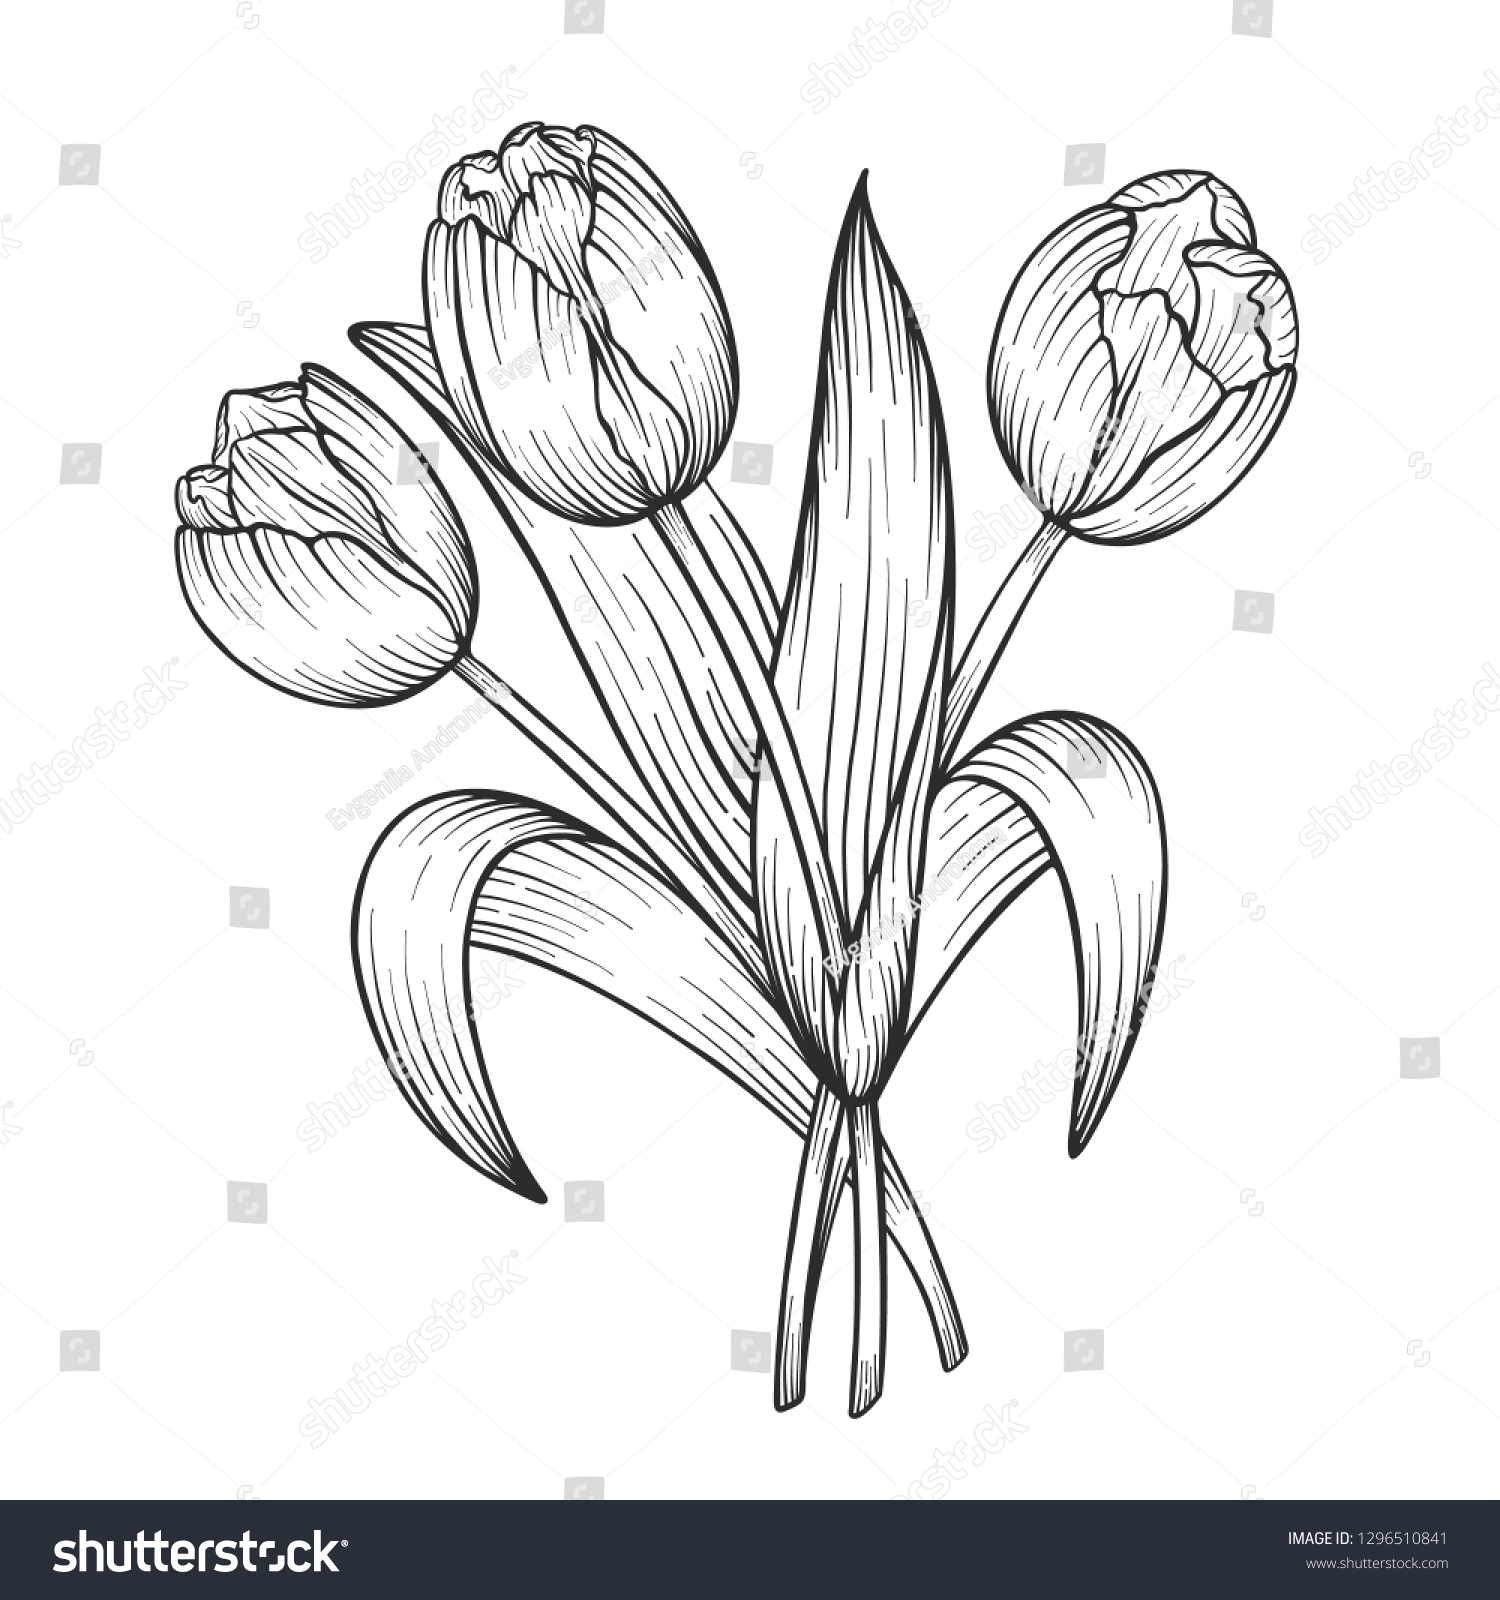 Hand Drawn Sketch Tulips Flower Bouquet Stock Vector (Royalty Free ...